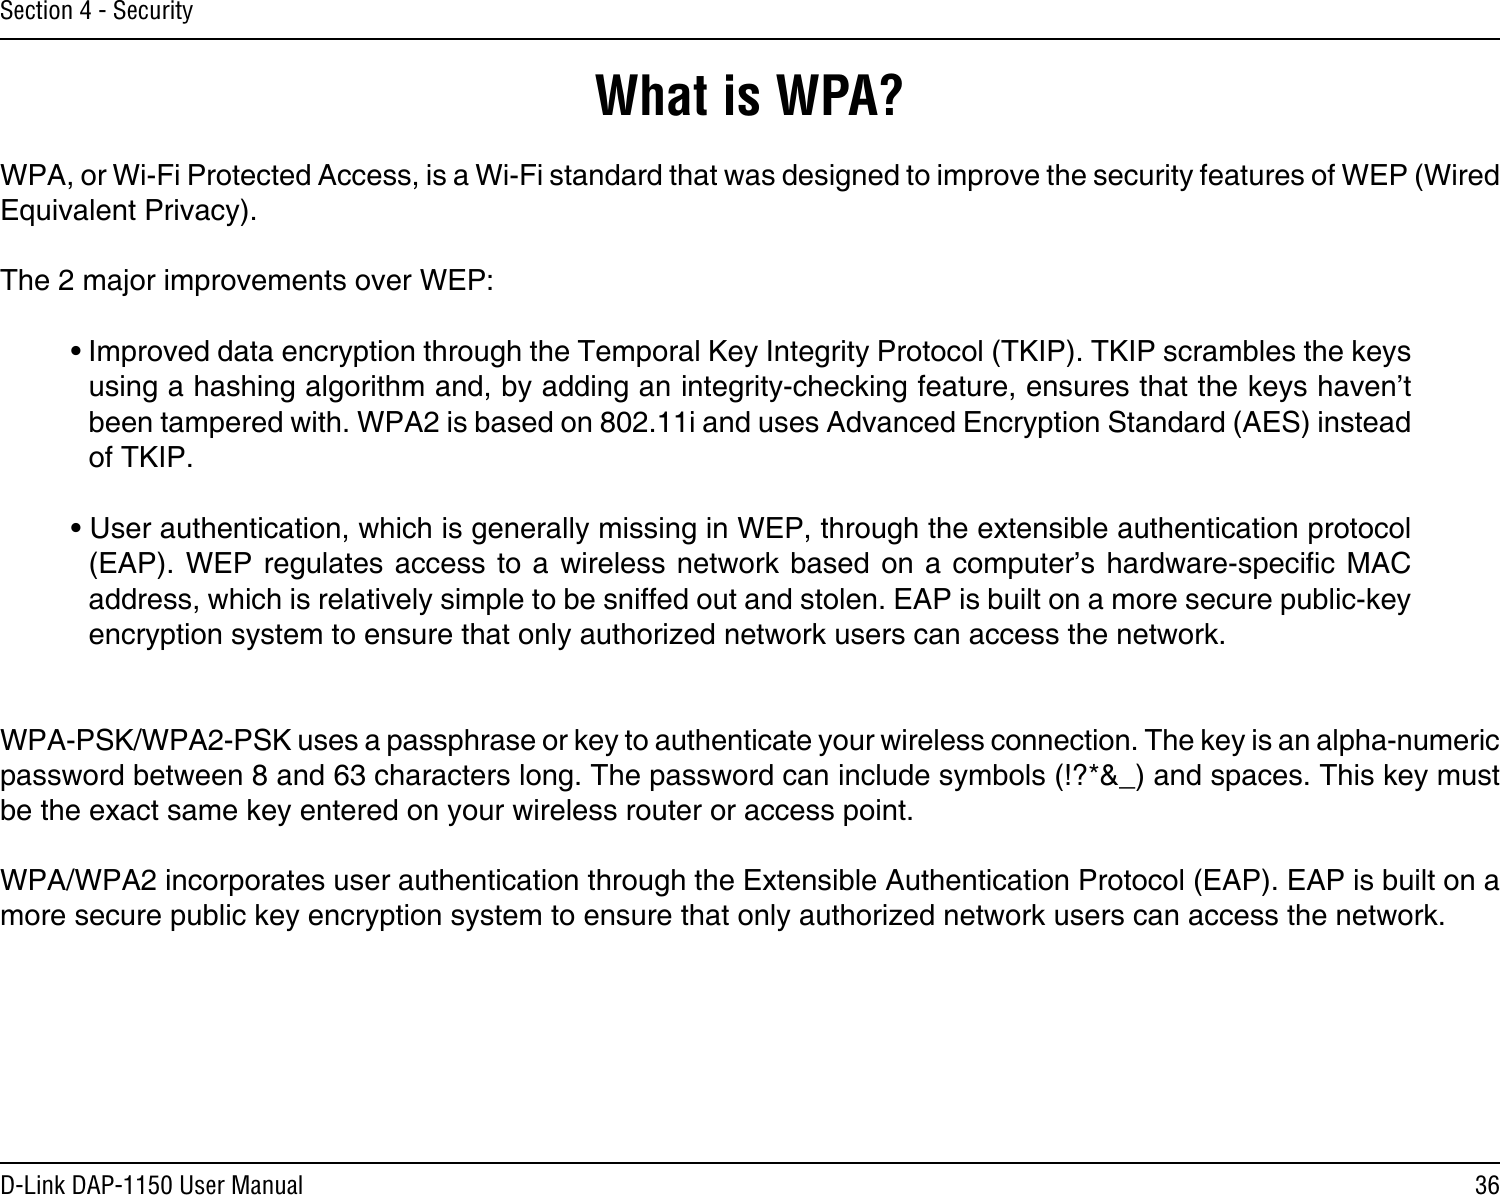 36D-Link DAP-1150 User ManualSection 4 - SecurityWhat is WPA?WPA, or Wi-Fi Protected Access, is a Wi-Fi standard that was designed to improve the security features of WEP (Wired Equivalent Privacy).  The 2 major improvements over WEP: • Improved data encryption through the Temporal Key Integrity Protocol (TKIP). TKIP scrambles the keys using a hashing algorithm and, by adding an integrity-checking feature, ensures that the keys haven’t been tampered with. WPA2 is based on 802.11i and uses Advanced Encryption Standard (AES) instead of TKIP.• User authentication, which is generally missing in WEP, through the extensible authentication protocol (EAP). WEP  regulates access to  a wireless  network  based on  a computer’s hardware-specic  MAC address, which is relatively simple to be sniffed out and stolen. EAP is built on a more secure public-key encryption system to ensure that only authorized network users can access the network.WPA-PSK/WPA2-PSK uses a passphrase or key to authenticate your wireless connection. The key is an alpha-numeric password between 8 and 63 characters long. The password can include symbols (!?*&amp;_) and spaces. This key must be the exact same key entered on your wireless router or access point.WPA/WPA2 incorporates user authentication through the Extensible Authentication Protocol (EAP). EAP is built on a more secure public key encryption system to ensure that only authorized network users can access the network.